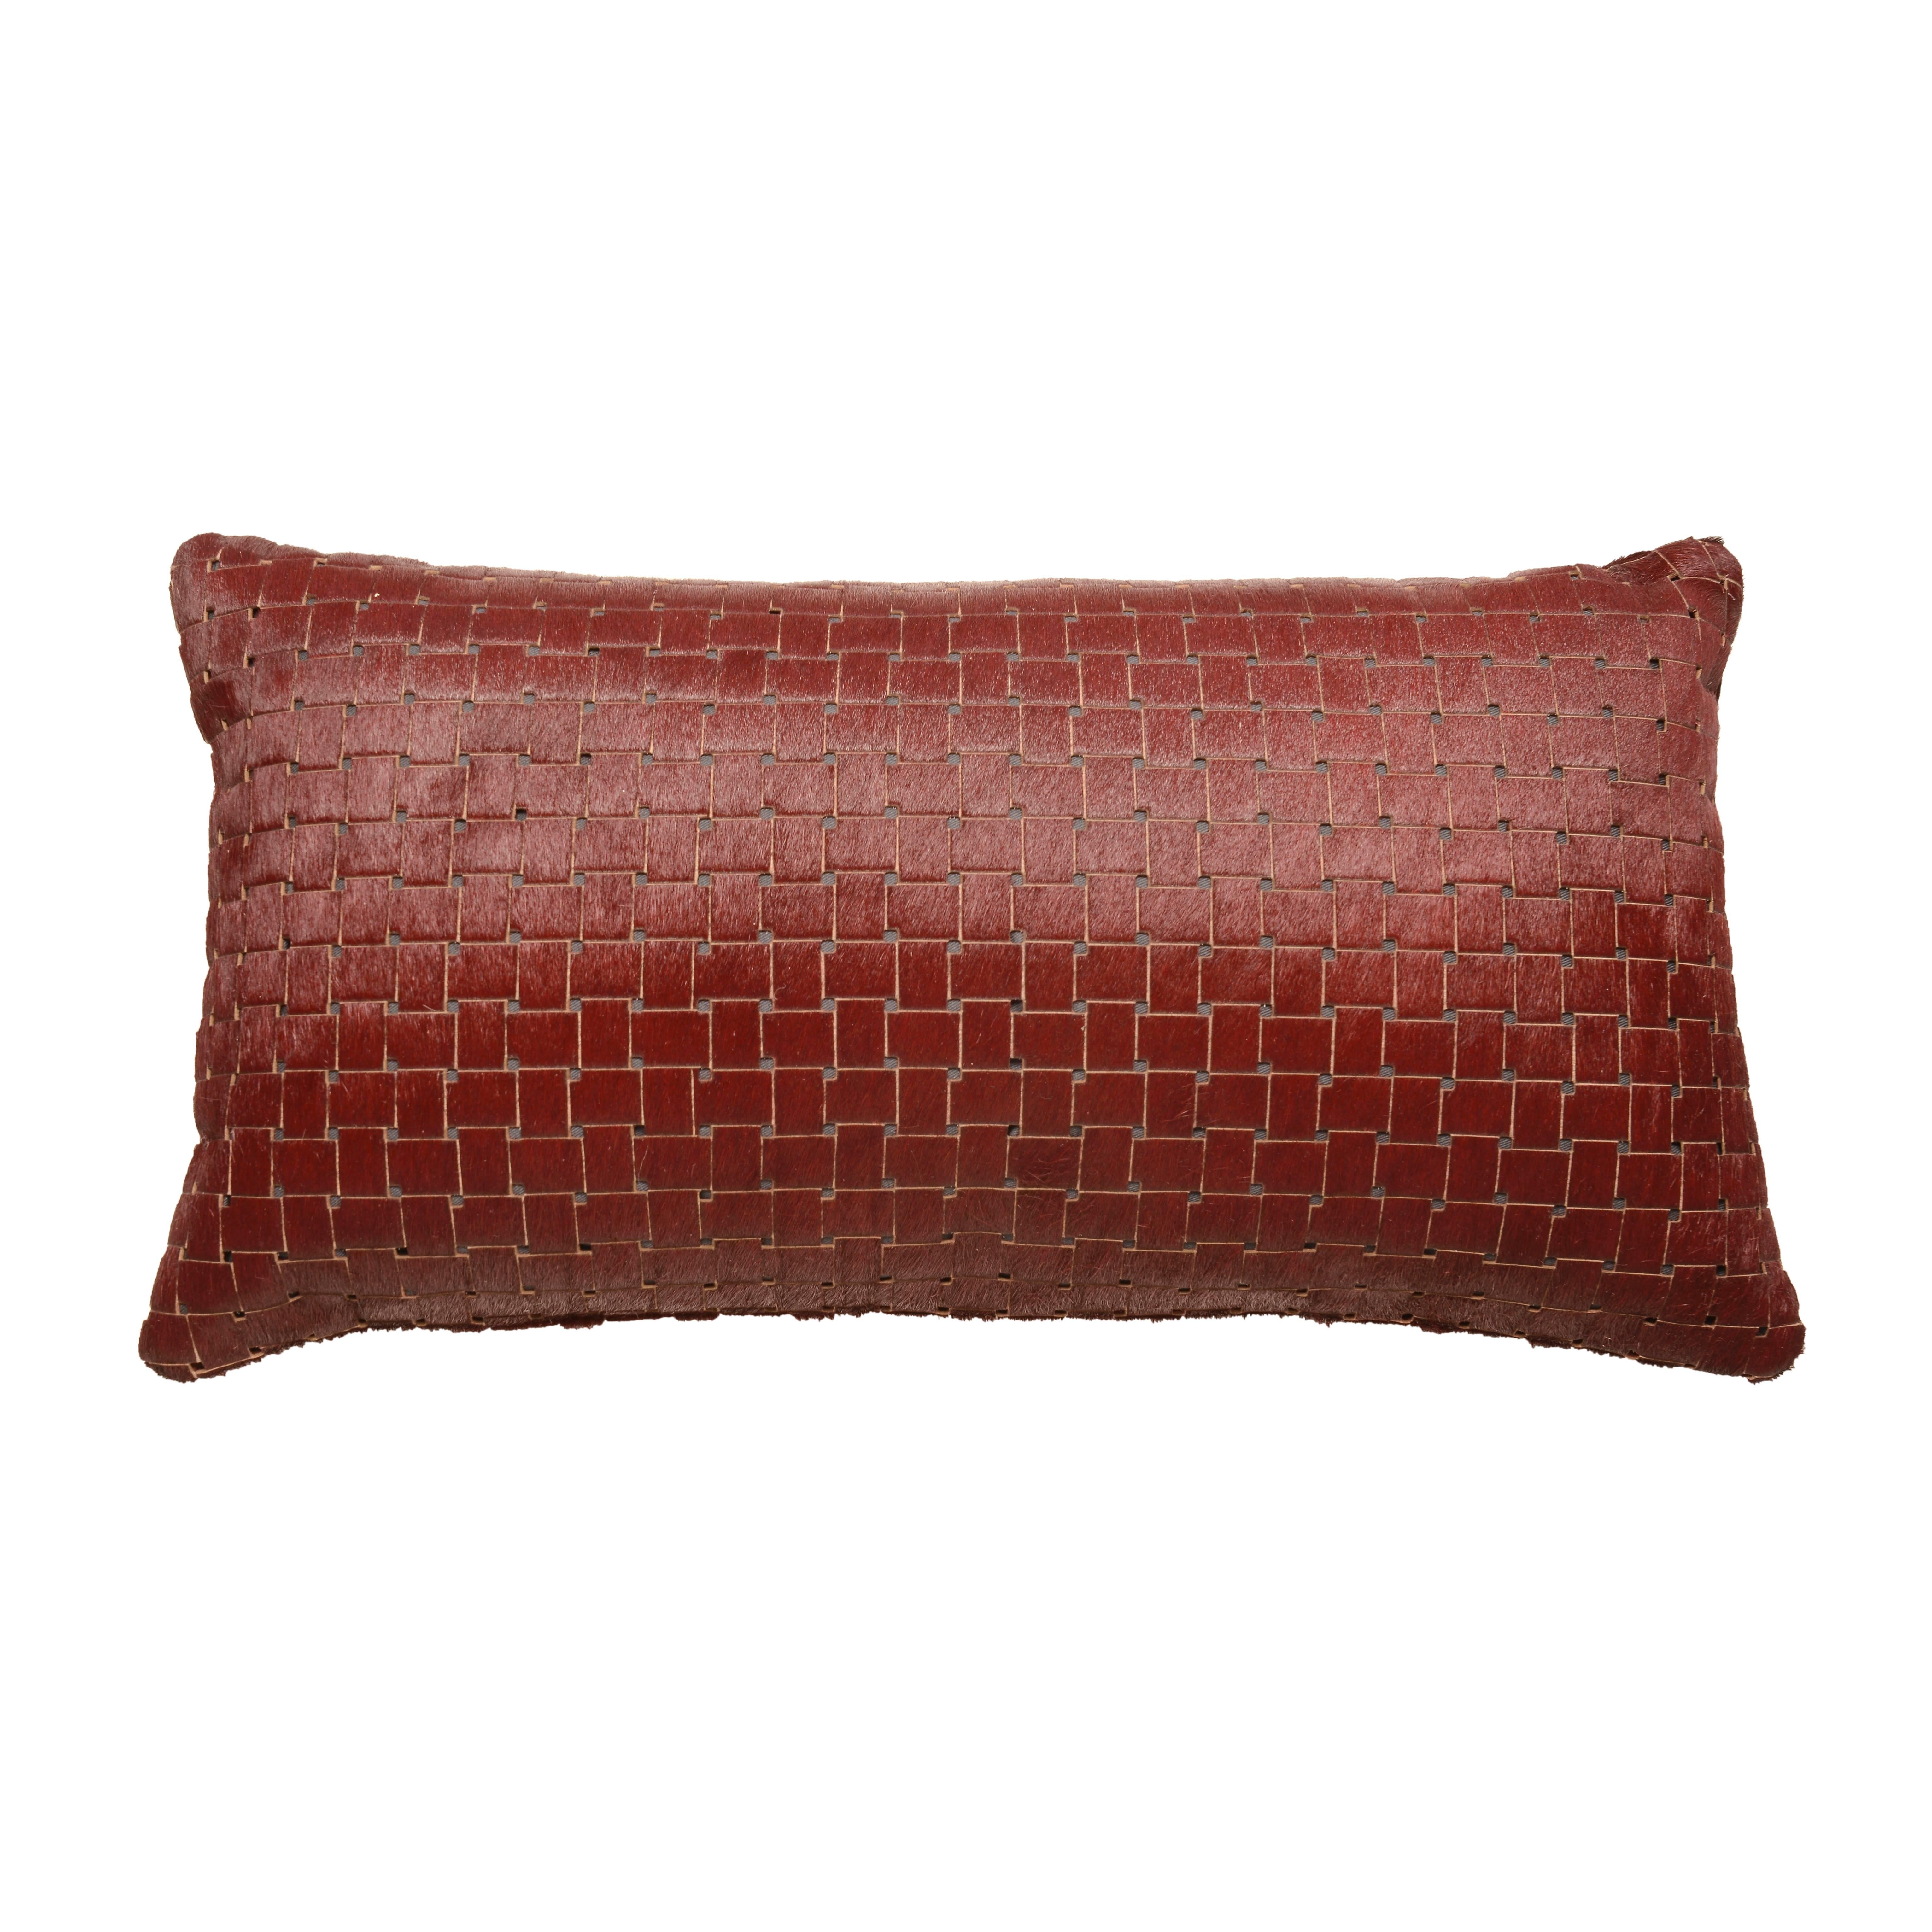 Contemporary burgundy laser cut cowhide hair lumbar pillow

Luxurious high sheen cowhide from Normandy France.
Burgundy with gray lining visible through sure laser cuts.
Basket weave laser cut pattern.
Measures: 12